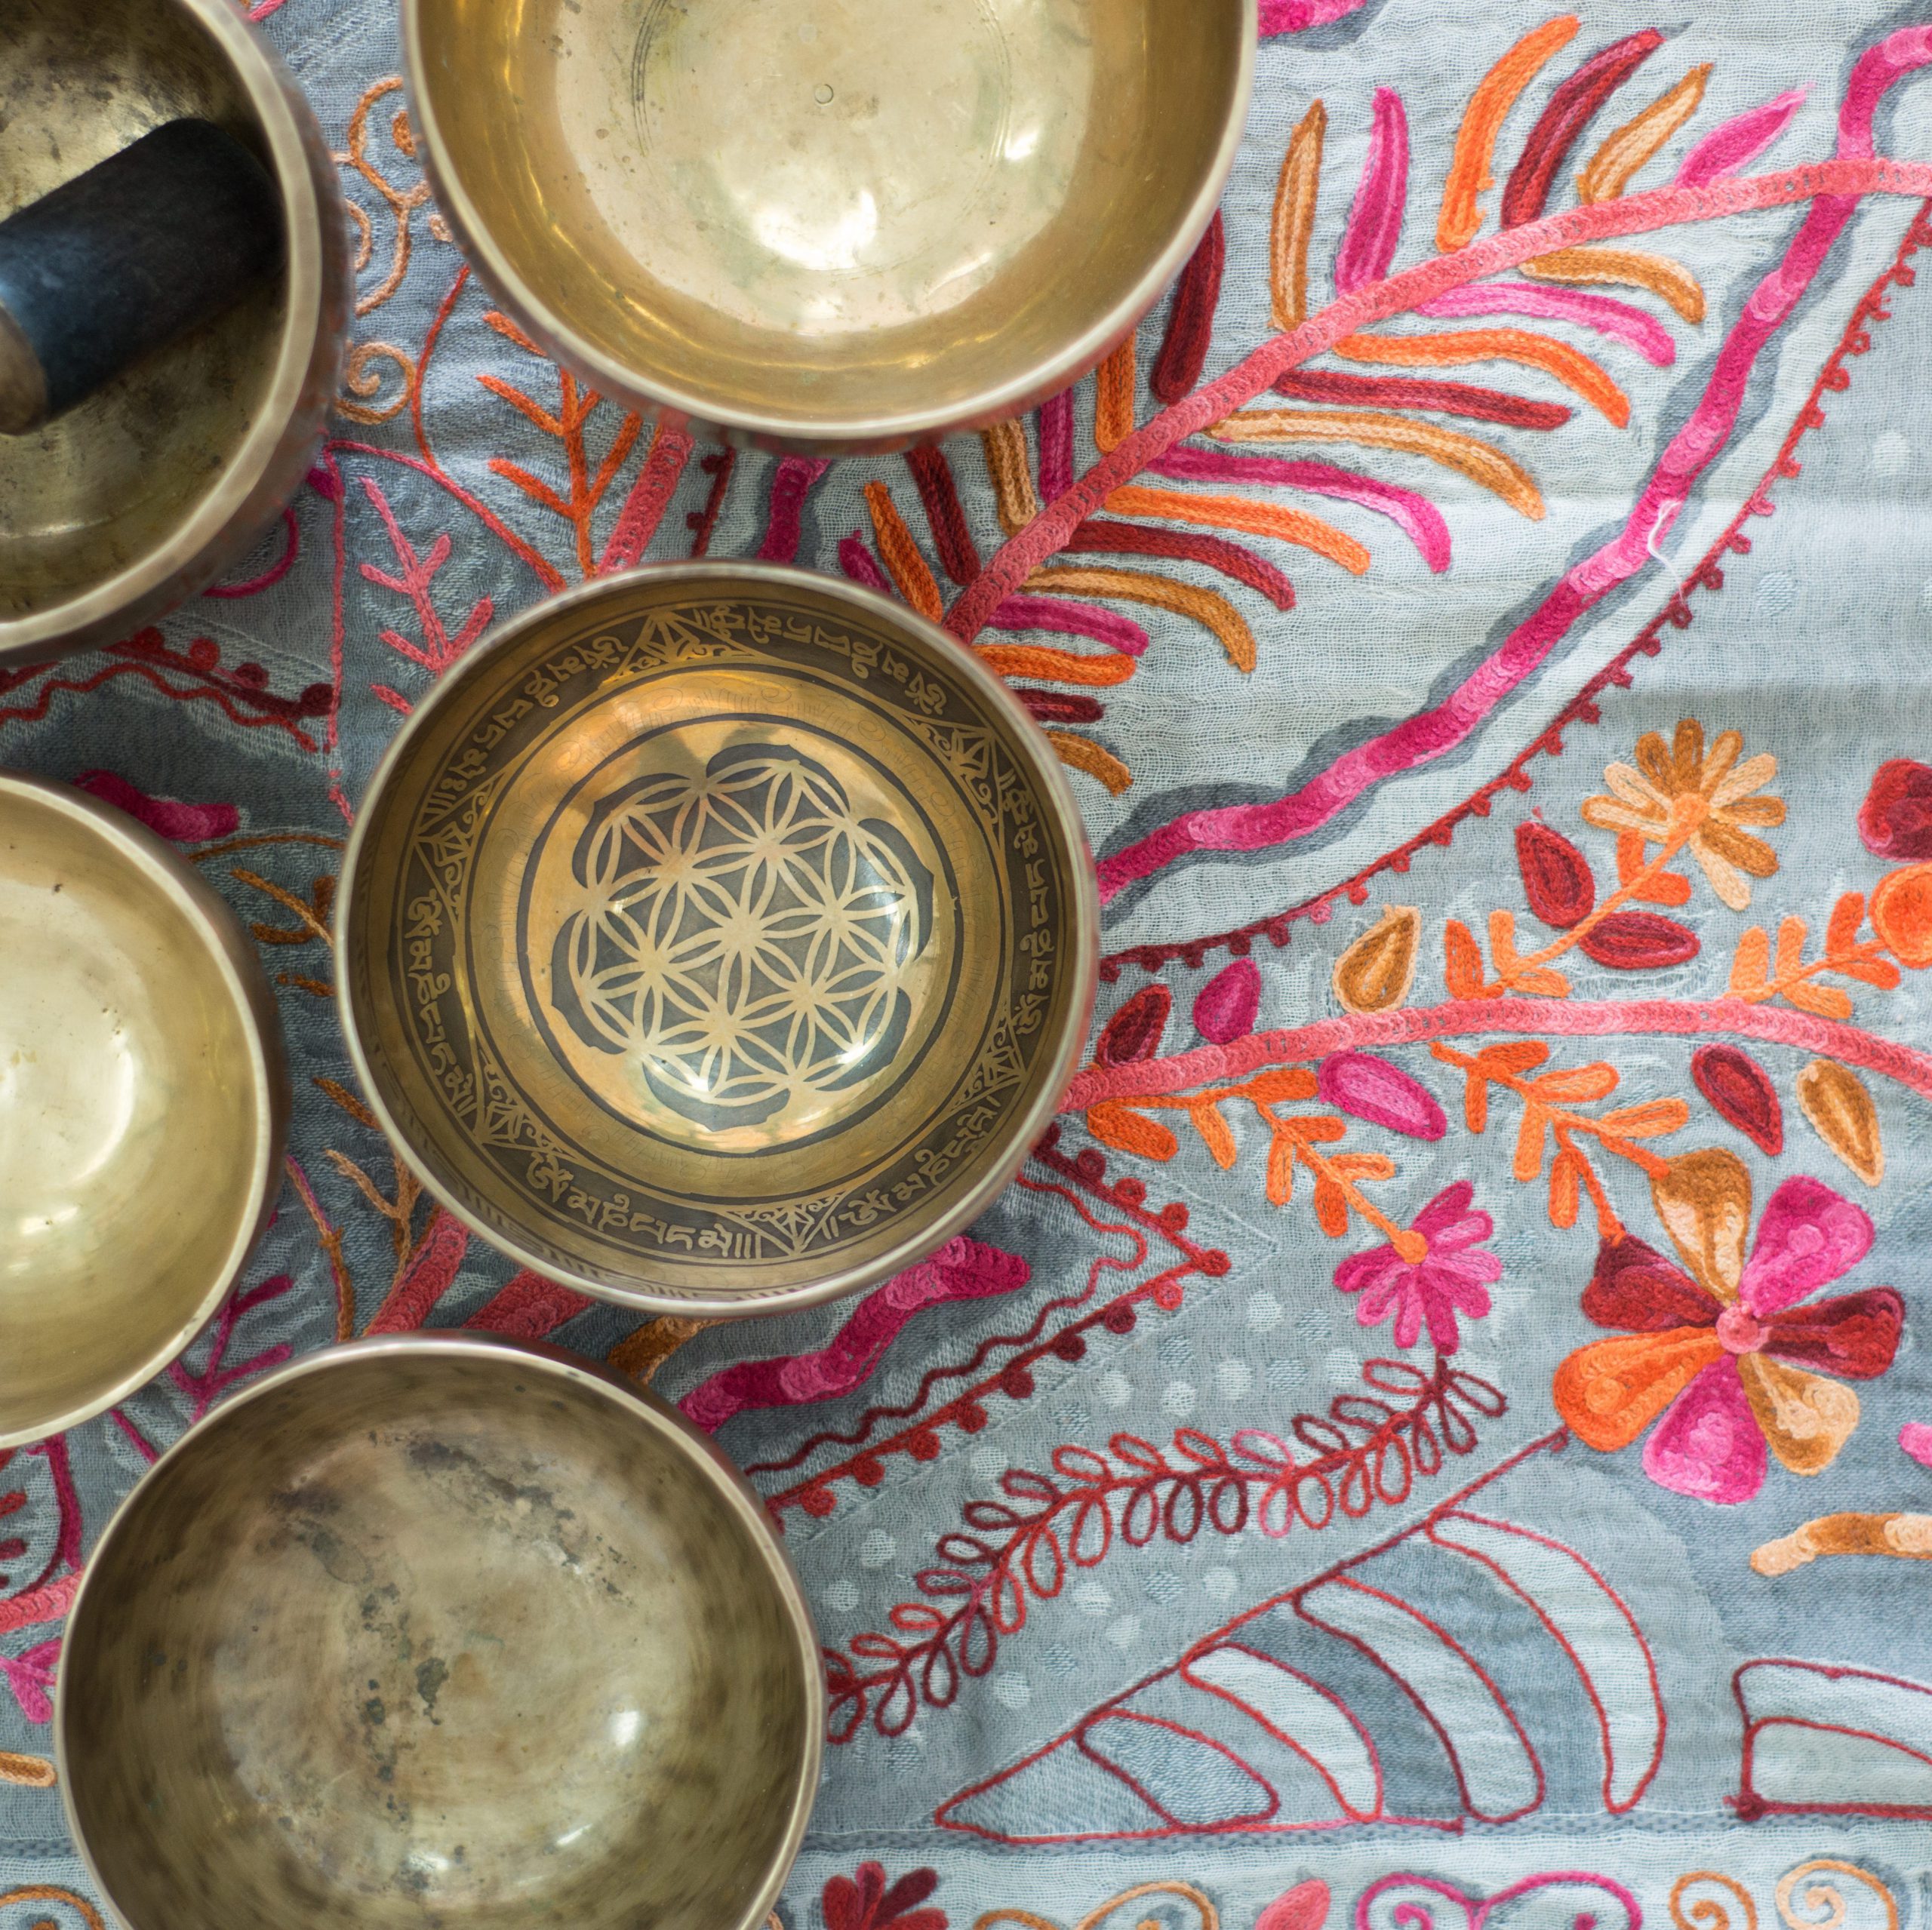 Singing Bowls on a Colourful Cloth